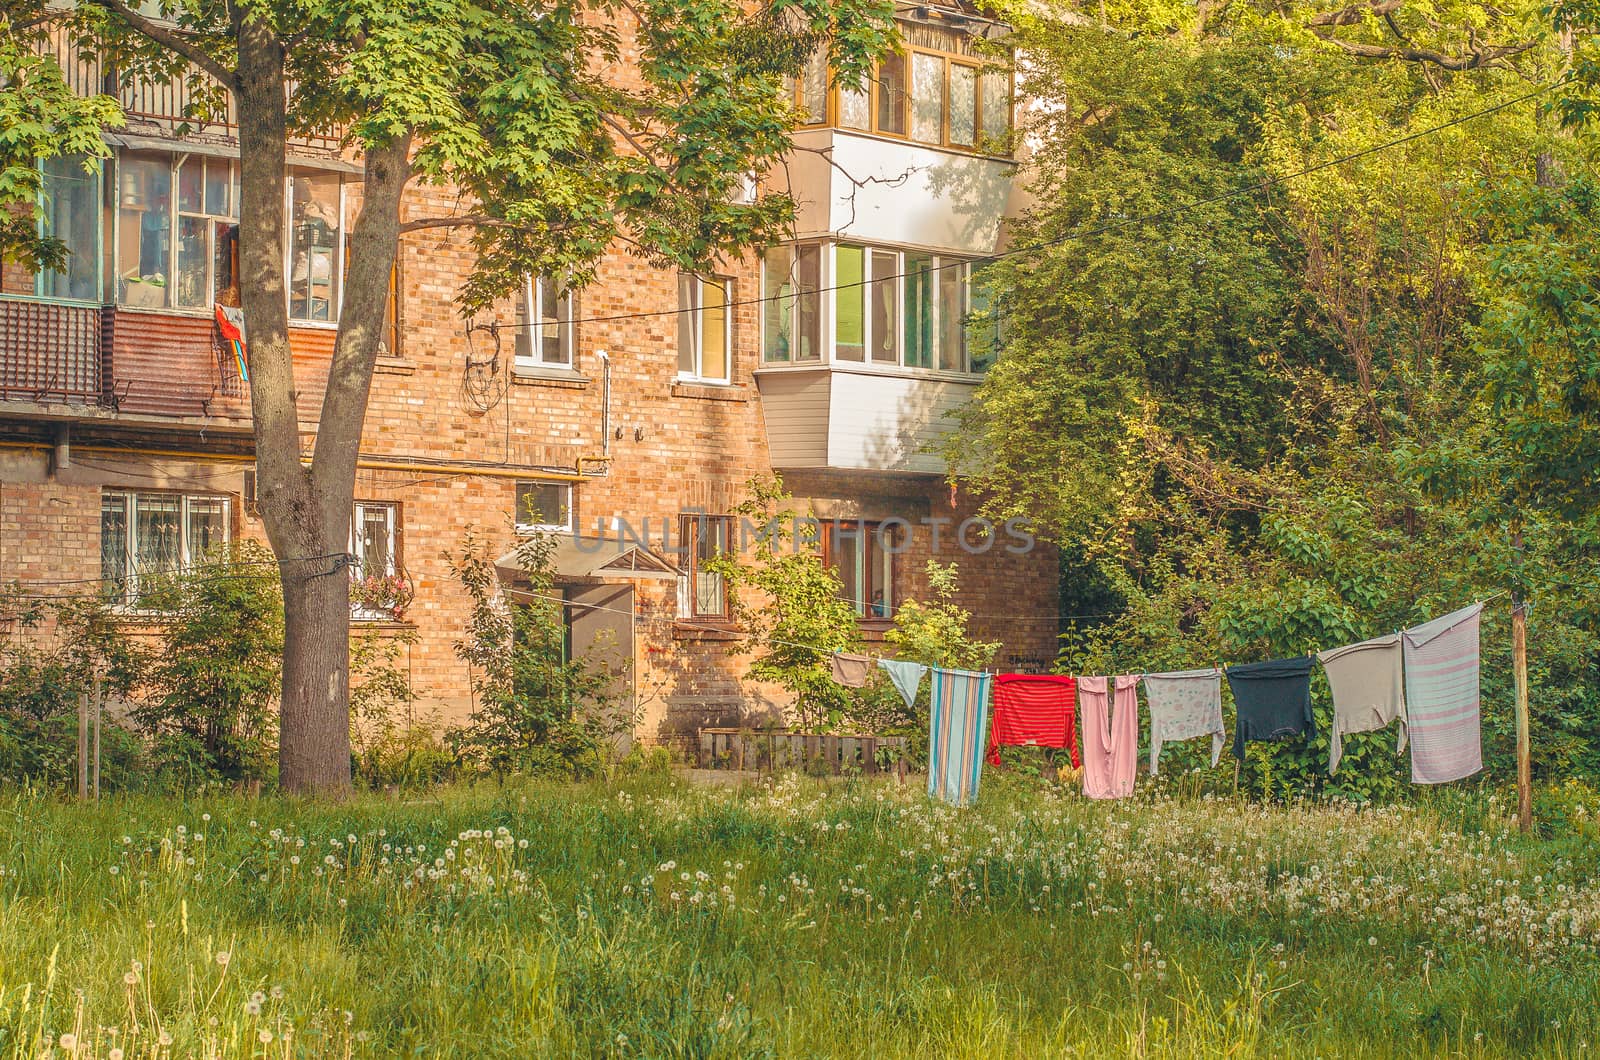 Clothes on a clothesline near old brick house and green trees